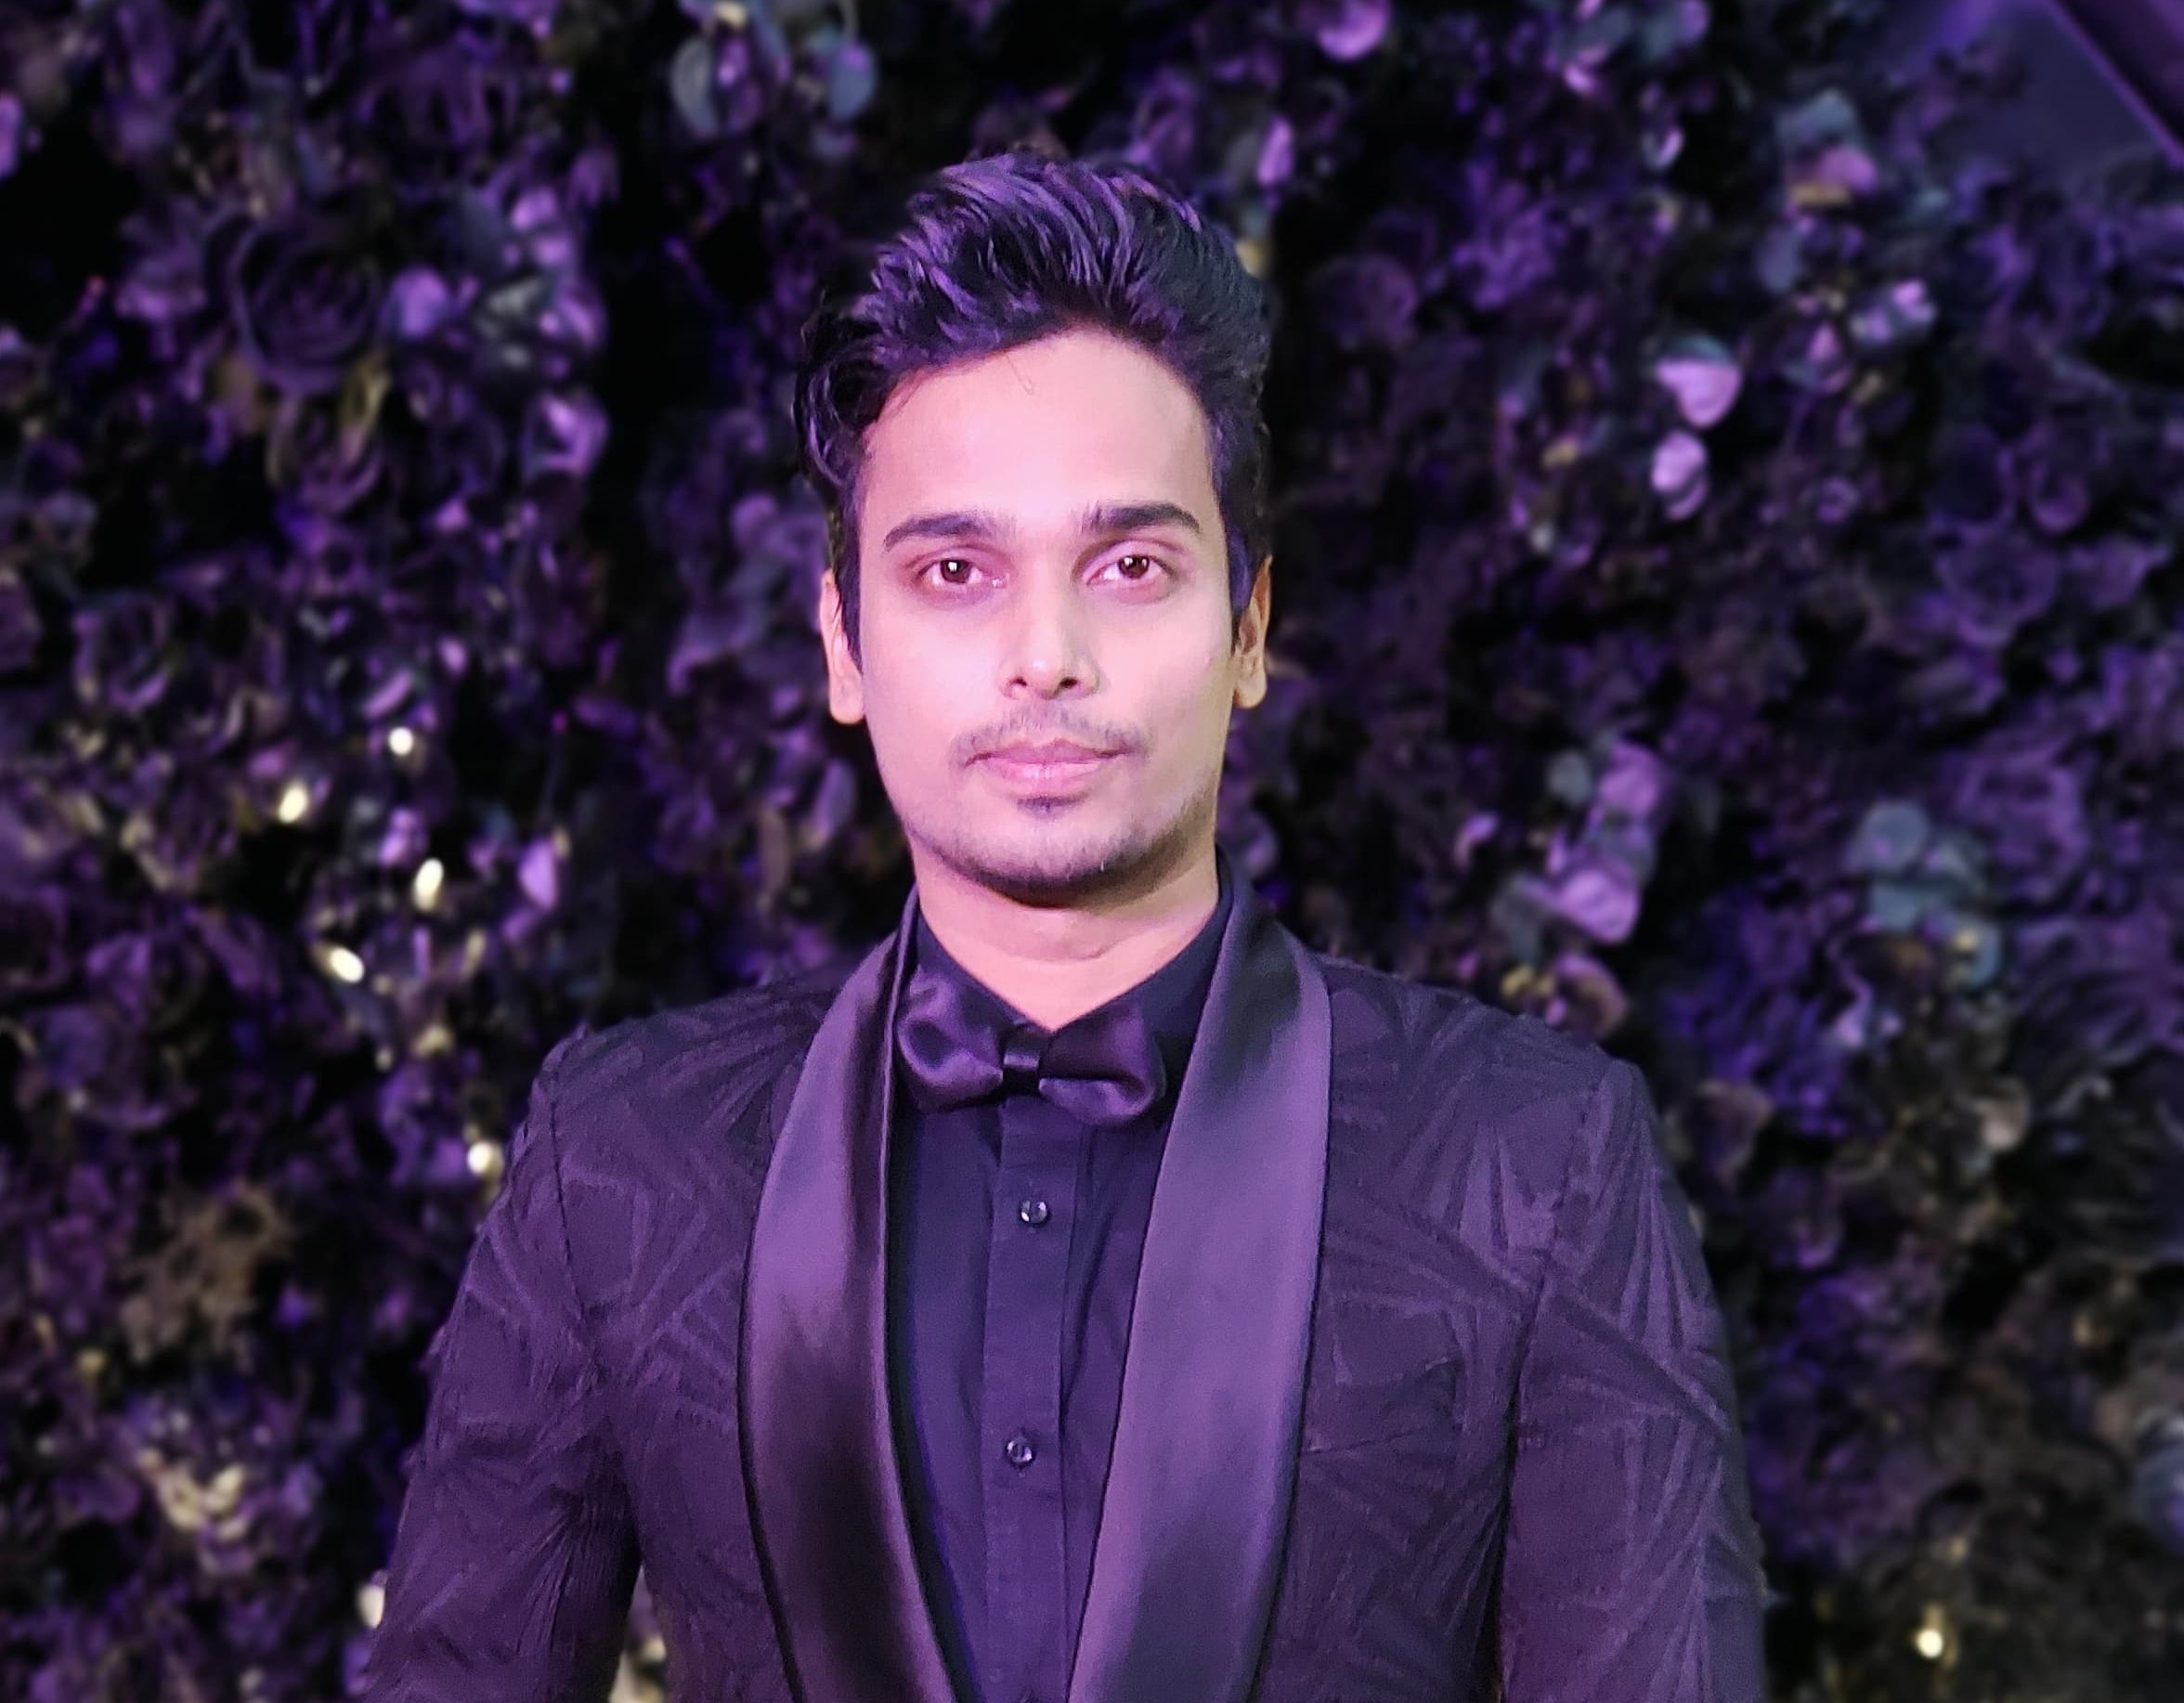 Beginning of a new era – Nikhil Anand is the new national director of Miss Universe, the biggest beauty pageant in the world